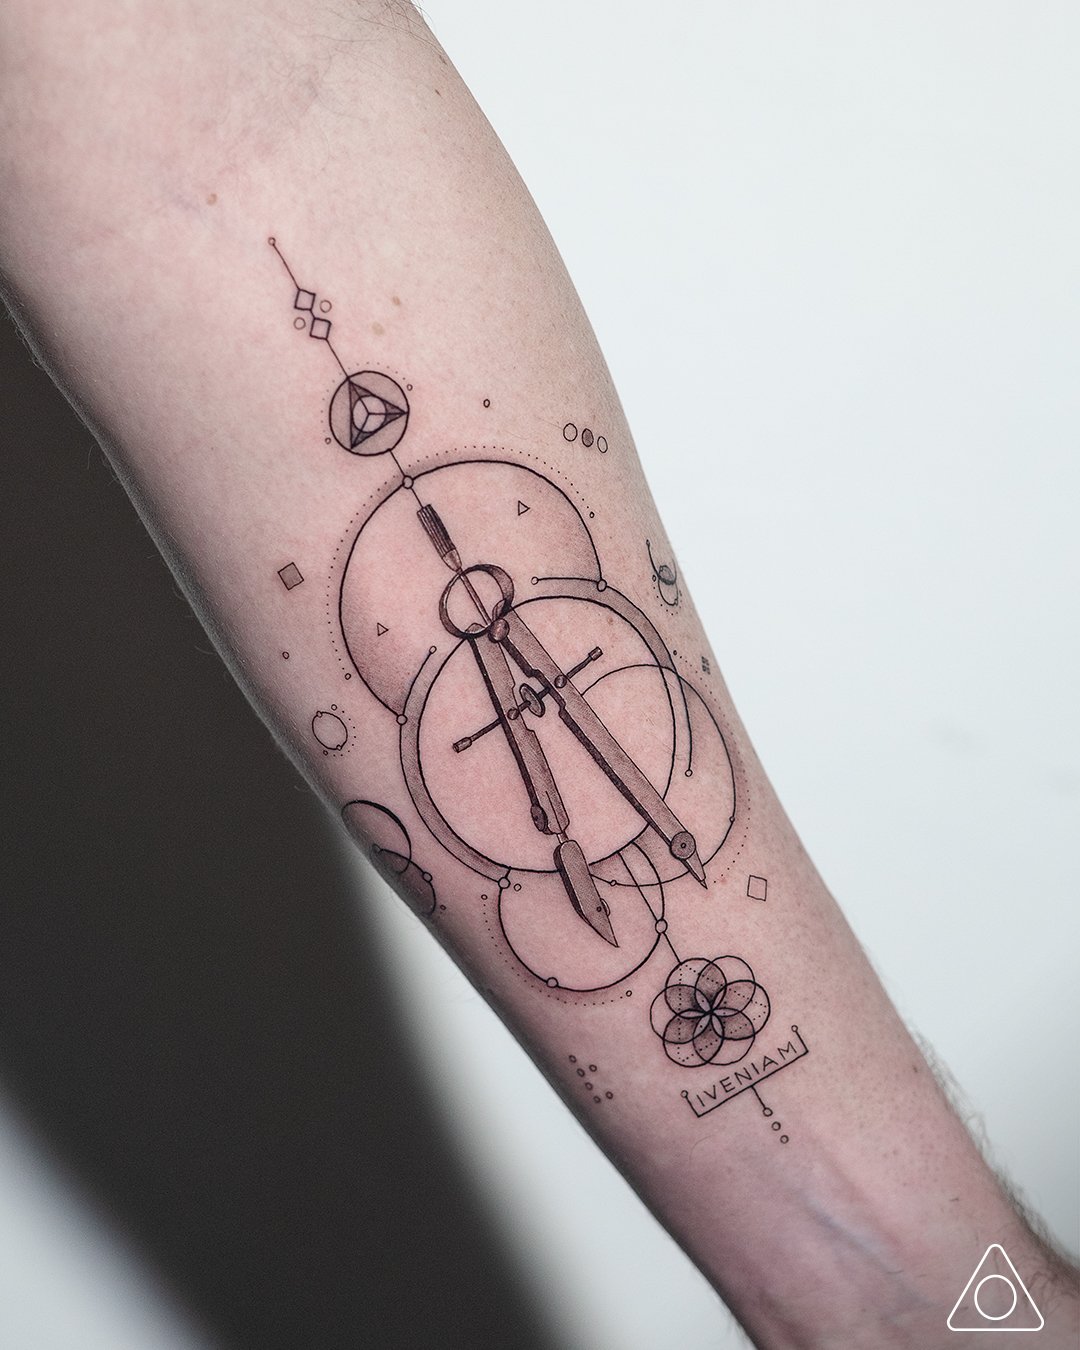 50 Best Architectural Tattoos That Will Make You Want One  DeMilked